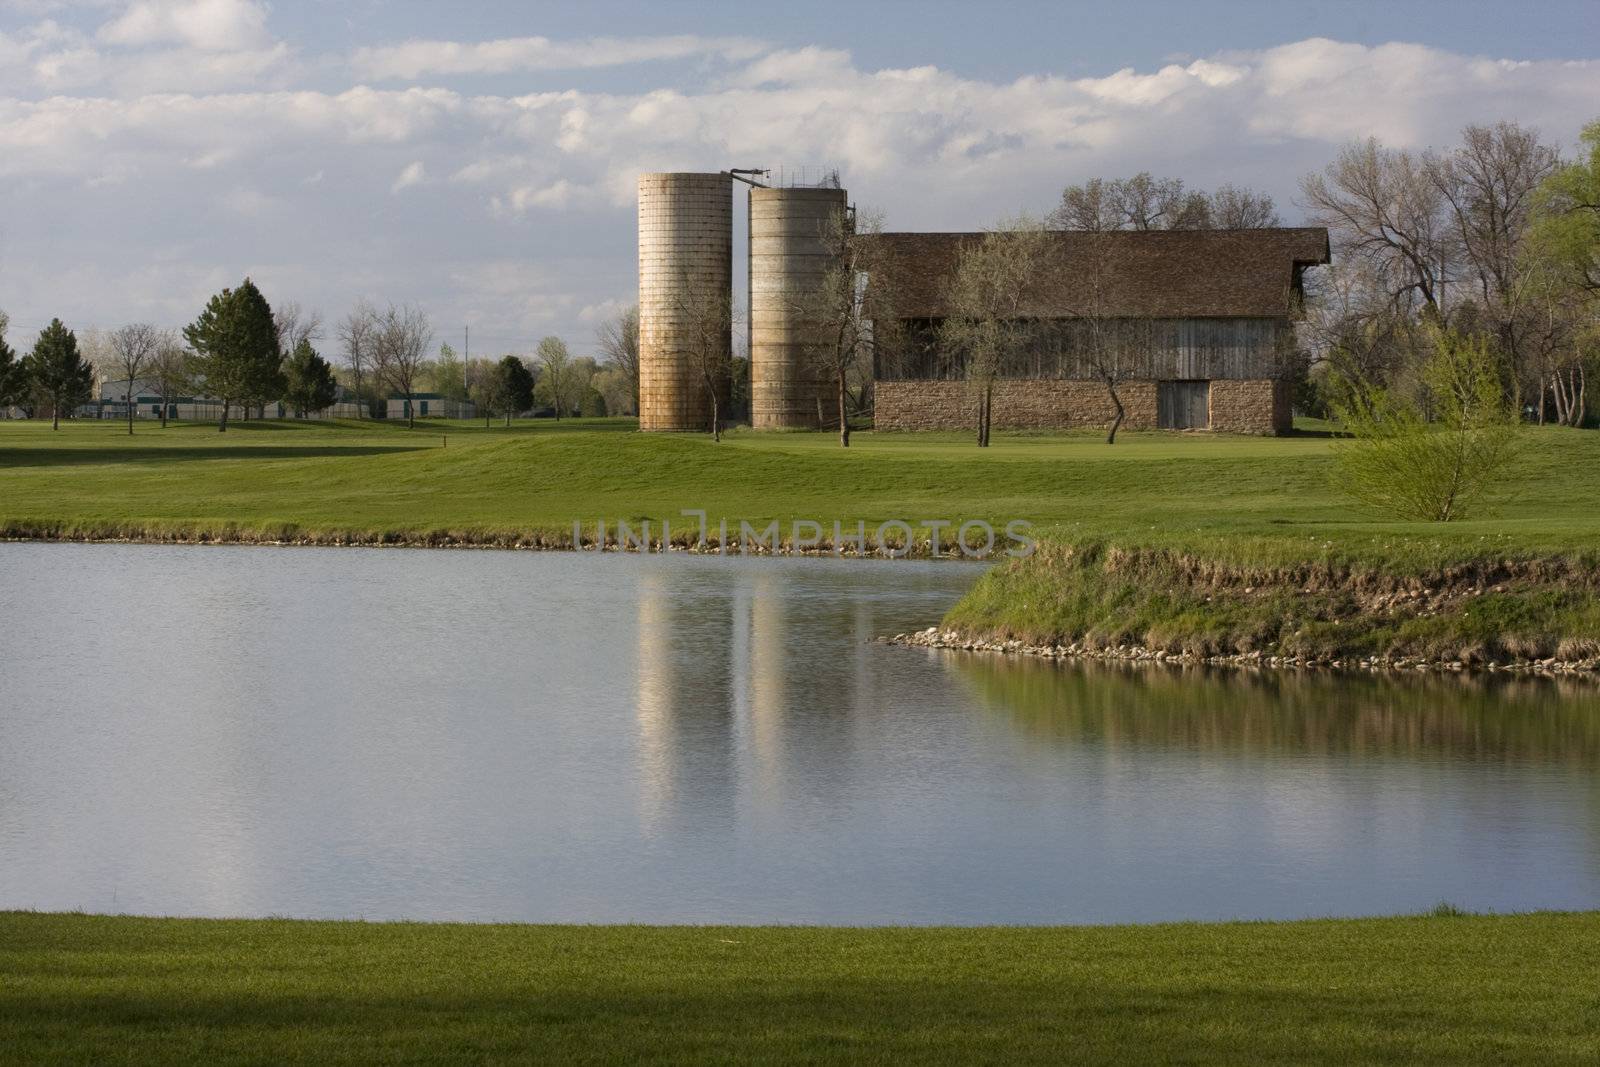 barn with two silos surrounded by green meadows, lake and houses - old farm turned into a golf course